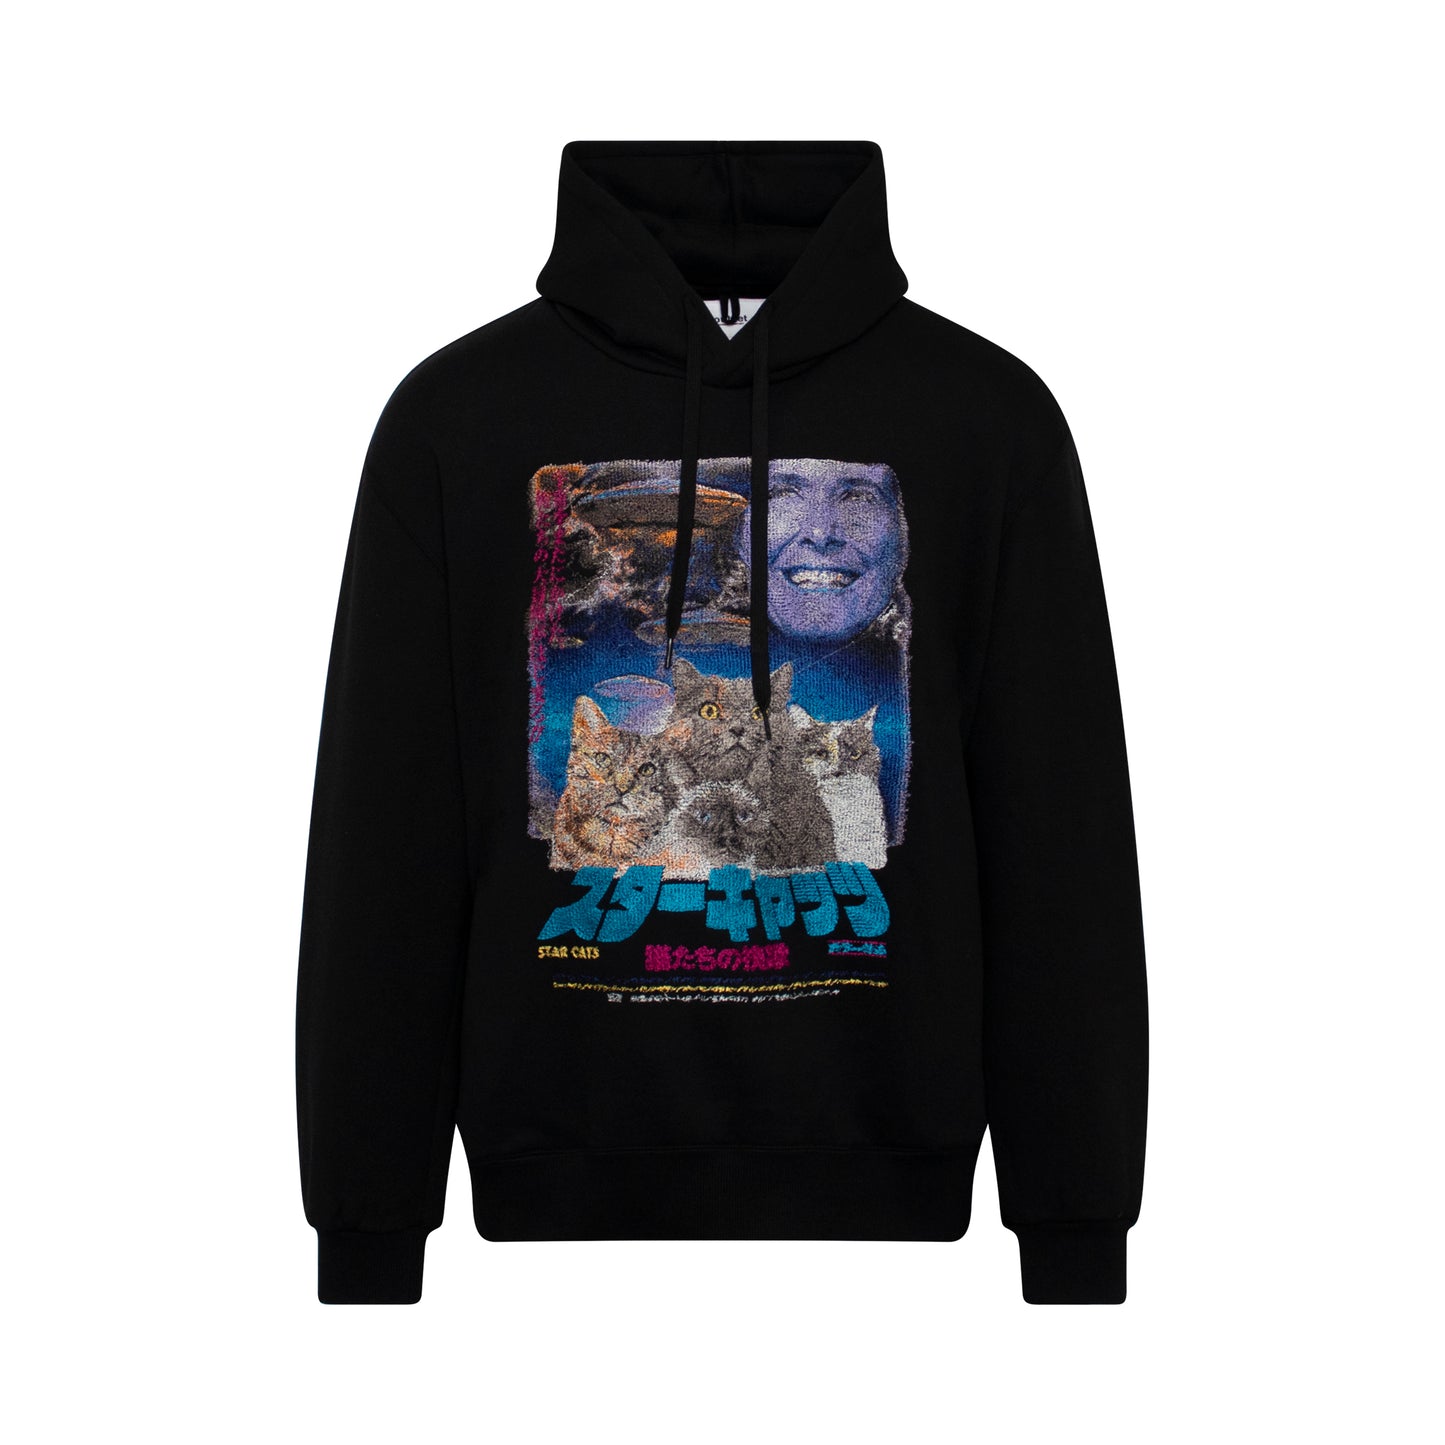 Retro Poster Embroidery Hoodie in Black